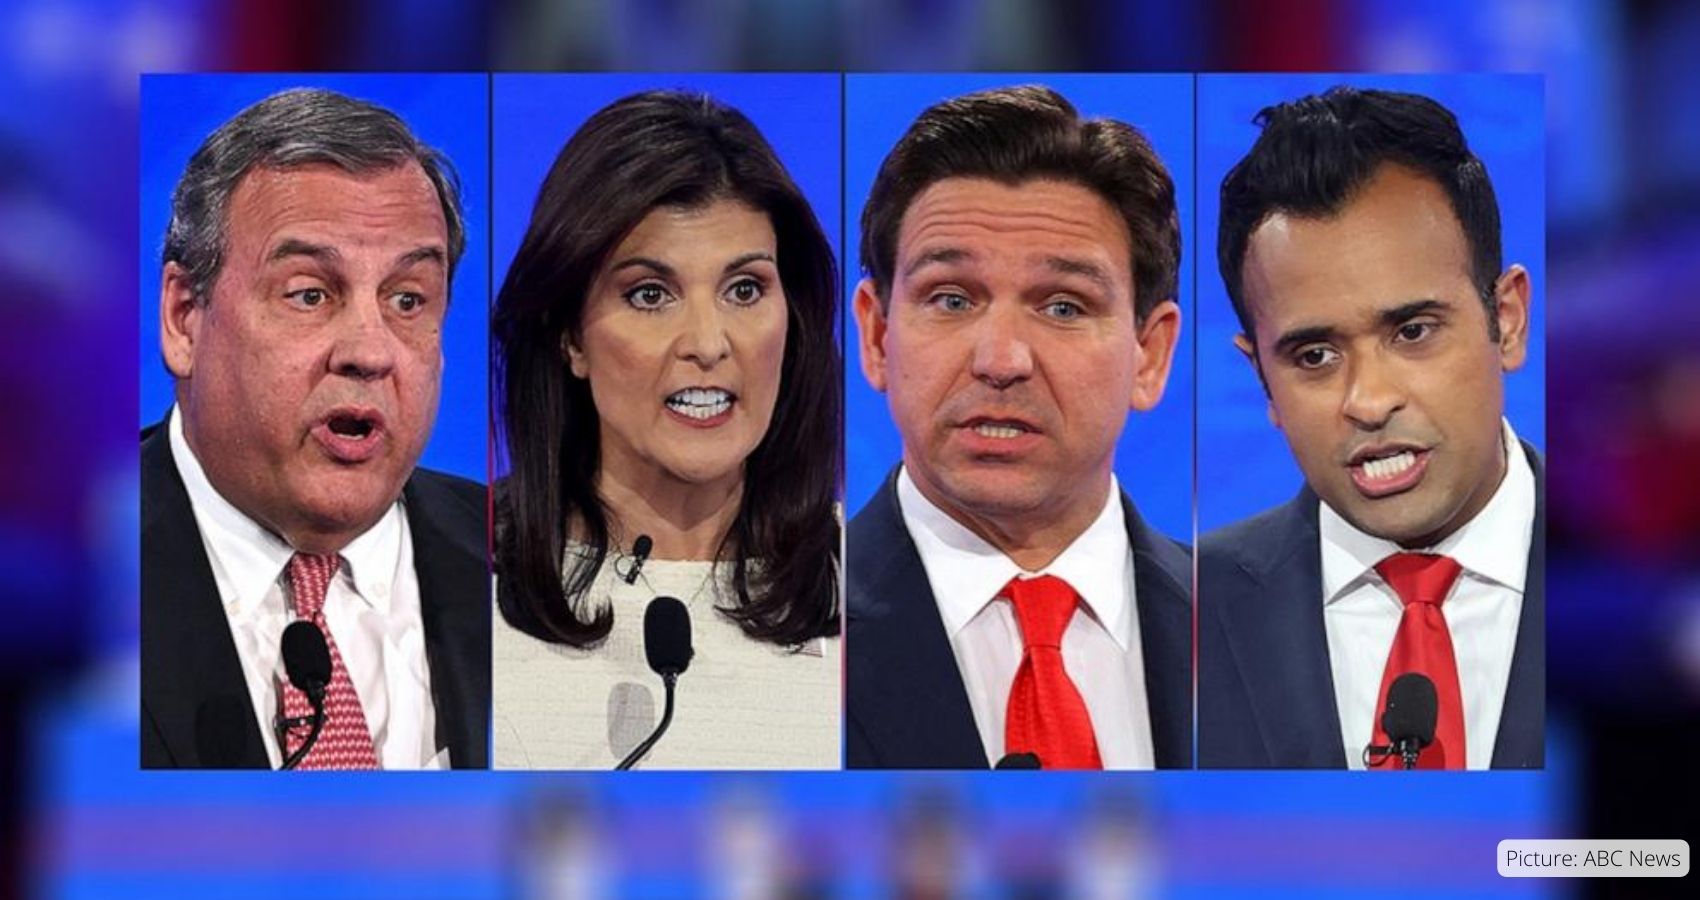 Fiery Fourth Republican Debate: Personal Clashes, Trump’s Absence, and Culture War Unfold in Intense Showdown